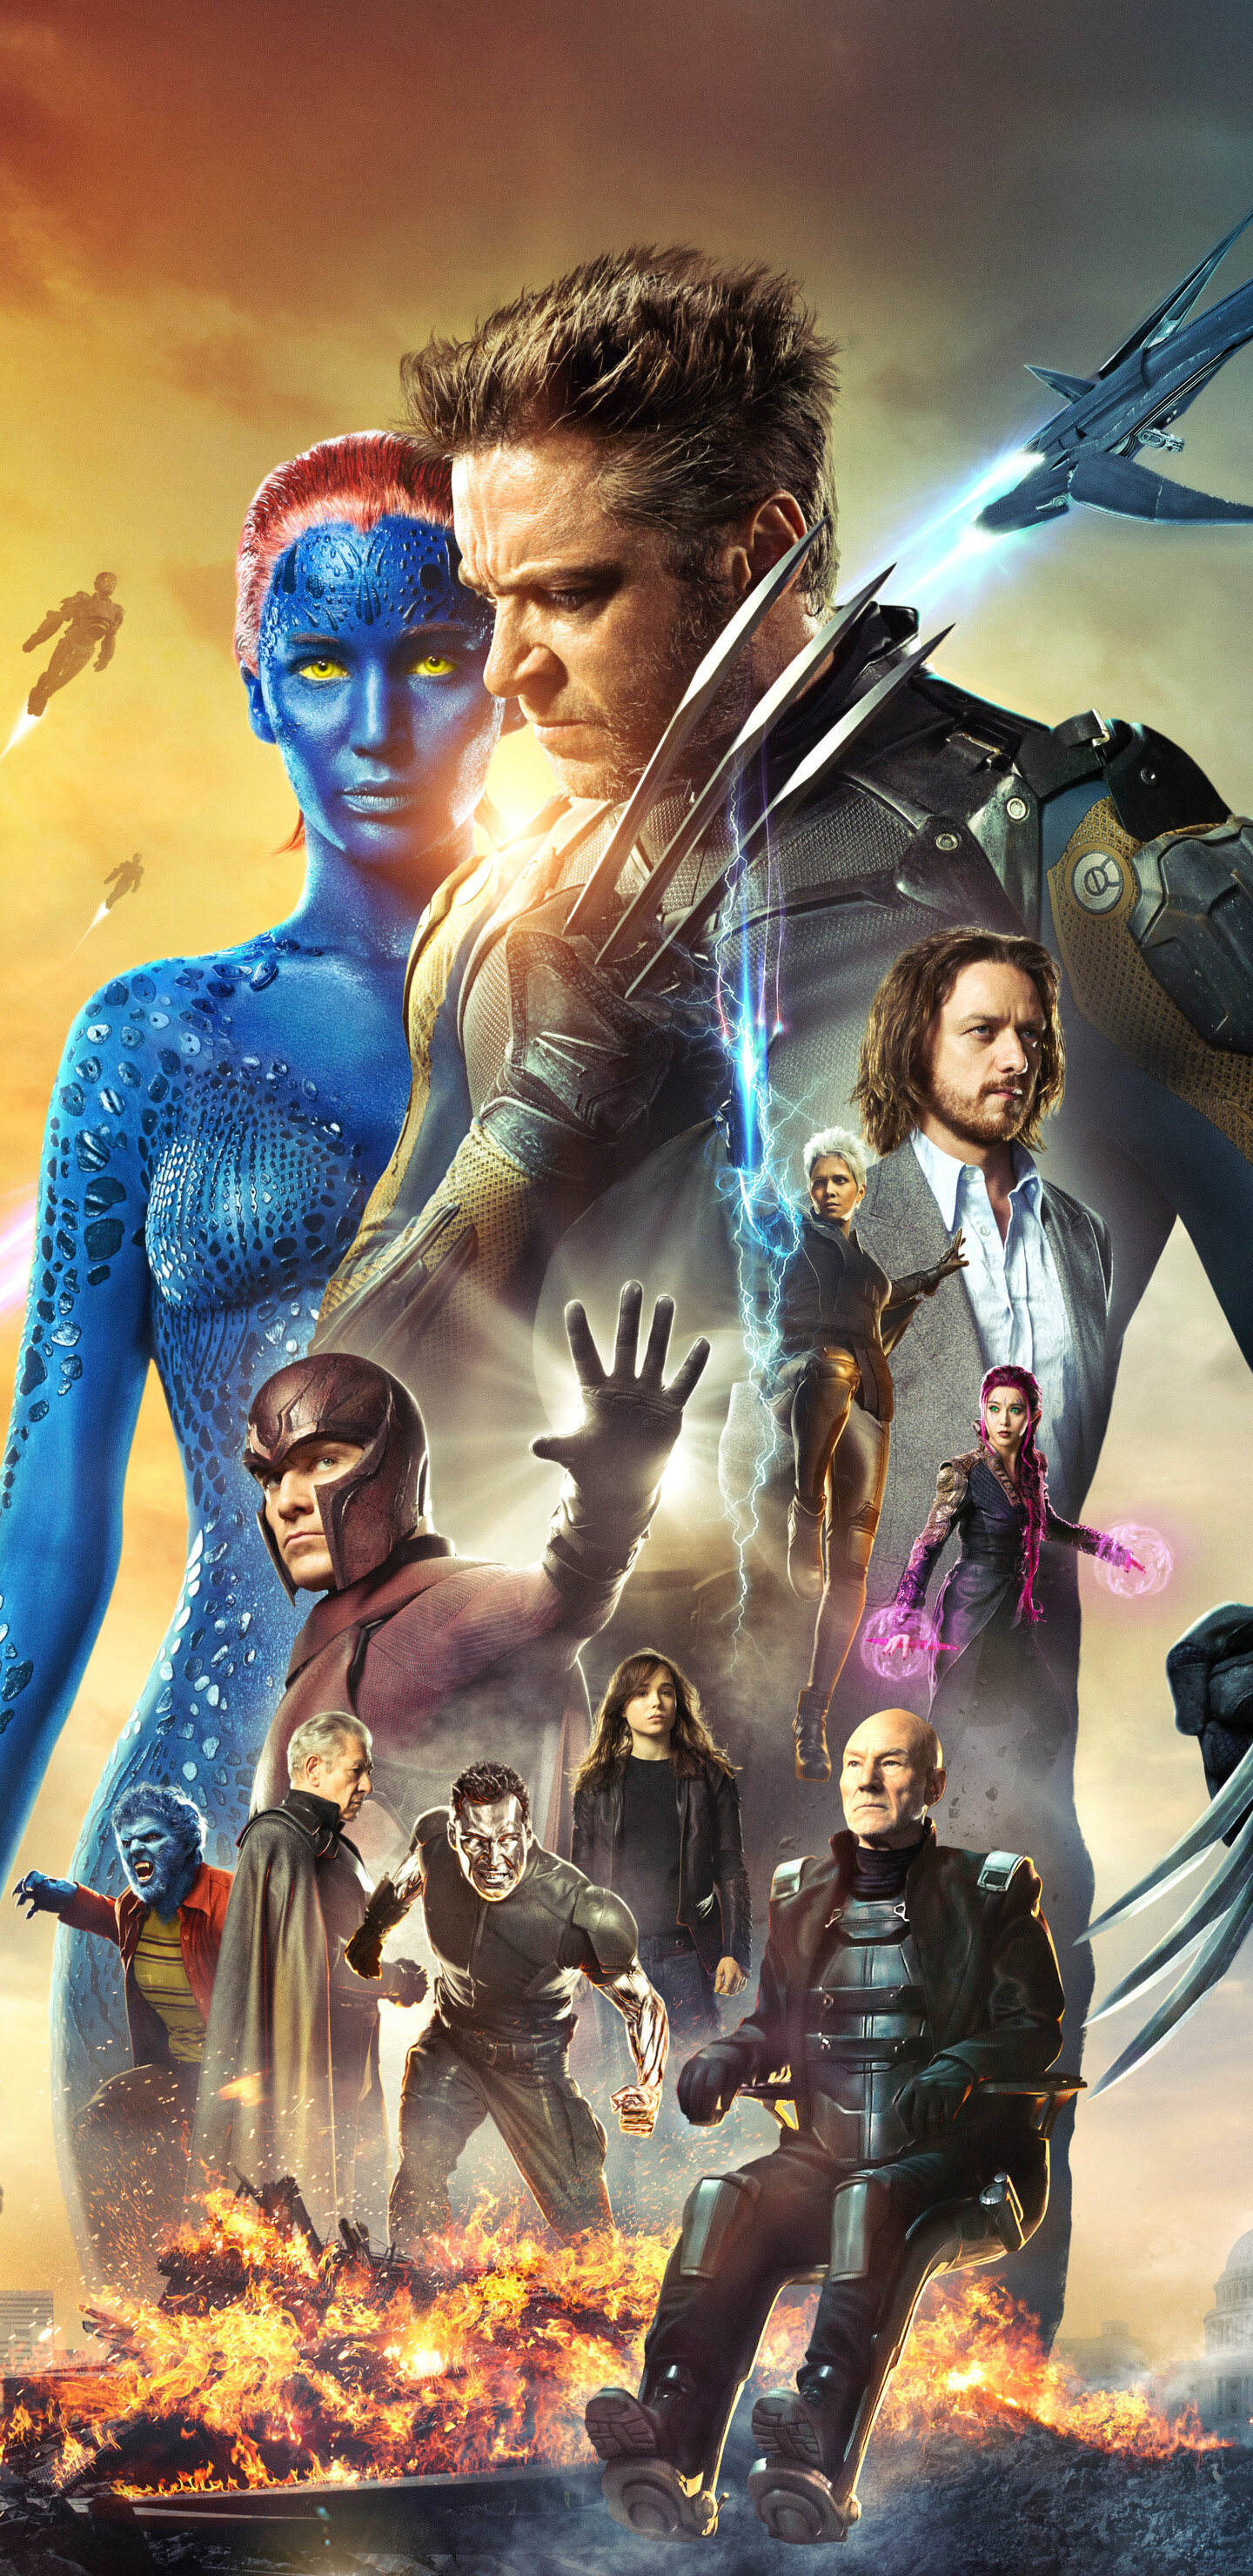 X-Men: Days Of Future Past, Movie poster, Superheroes. 1440x2960 HD Background.